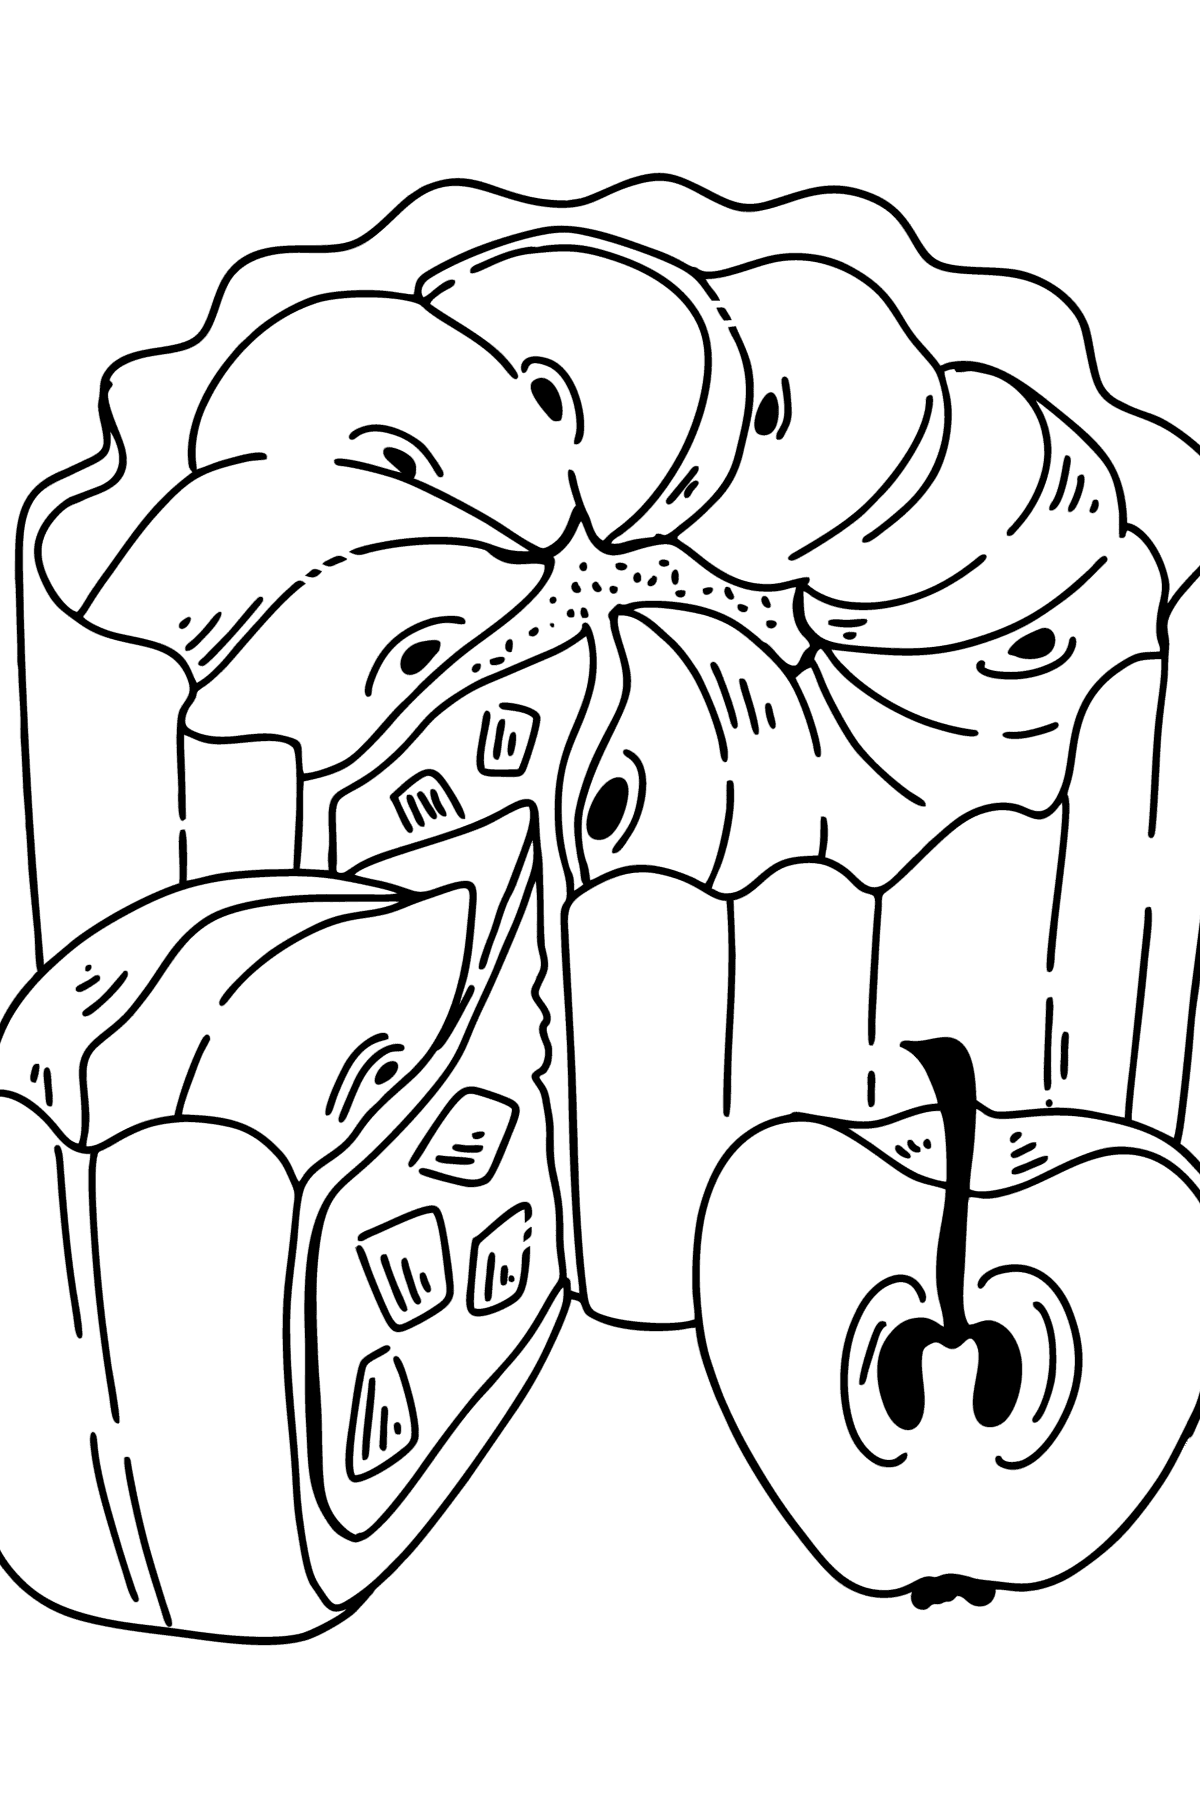 Coloring page - Apple Pie, Charlotte - Coloring Pages for Kids